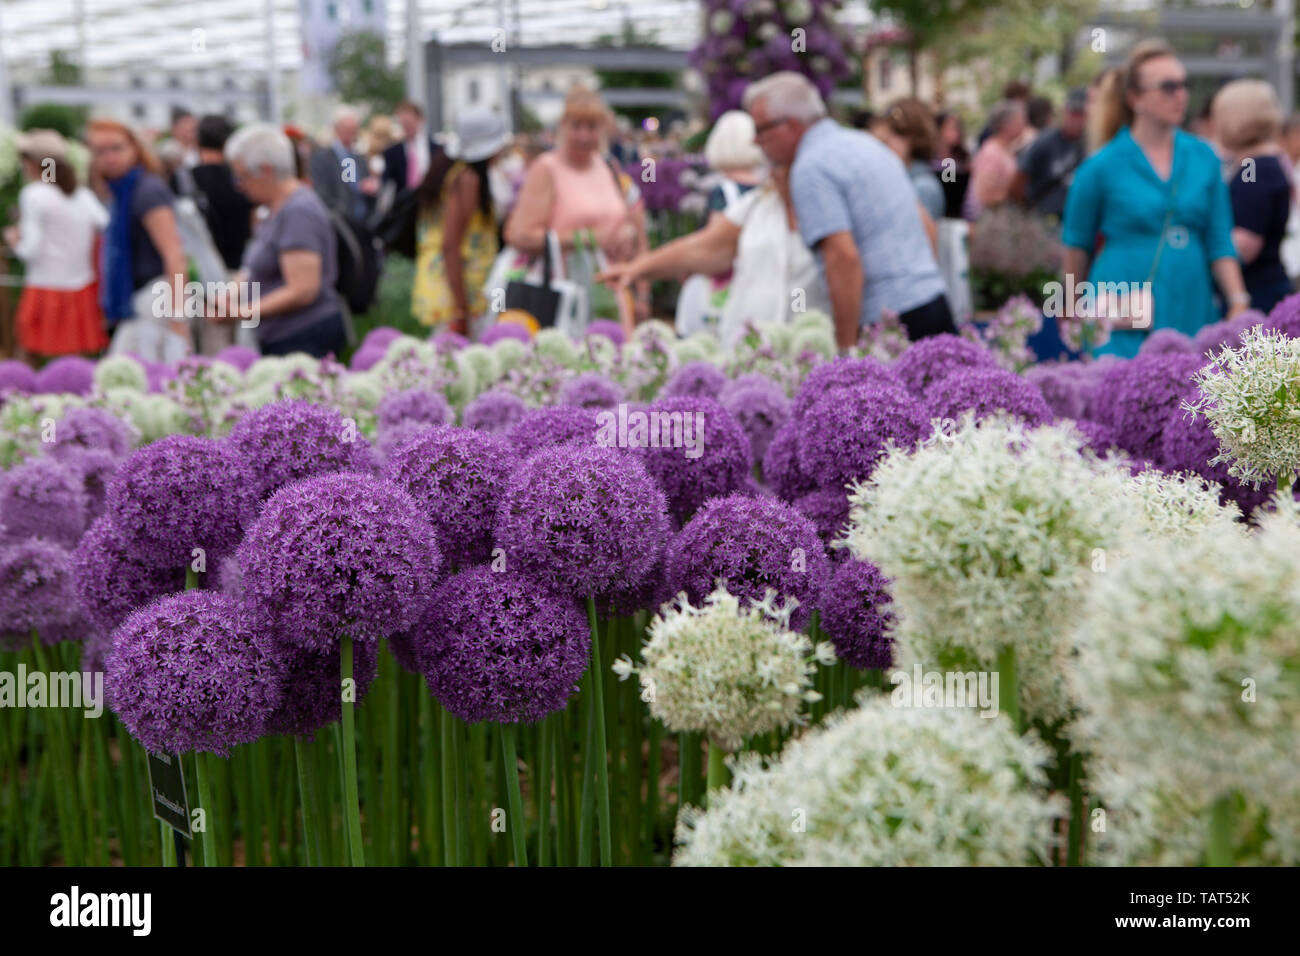 The 2019 RHS chelsea Flower Show: a display of white and purle alliums in the Great Pavillion. Stock Photo